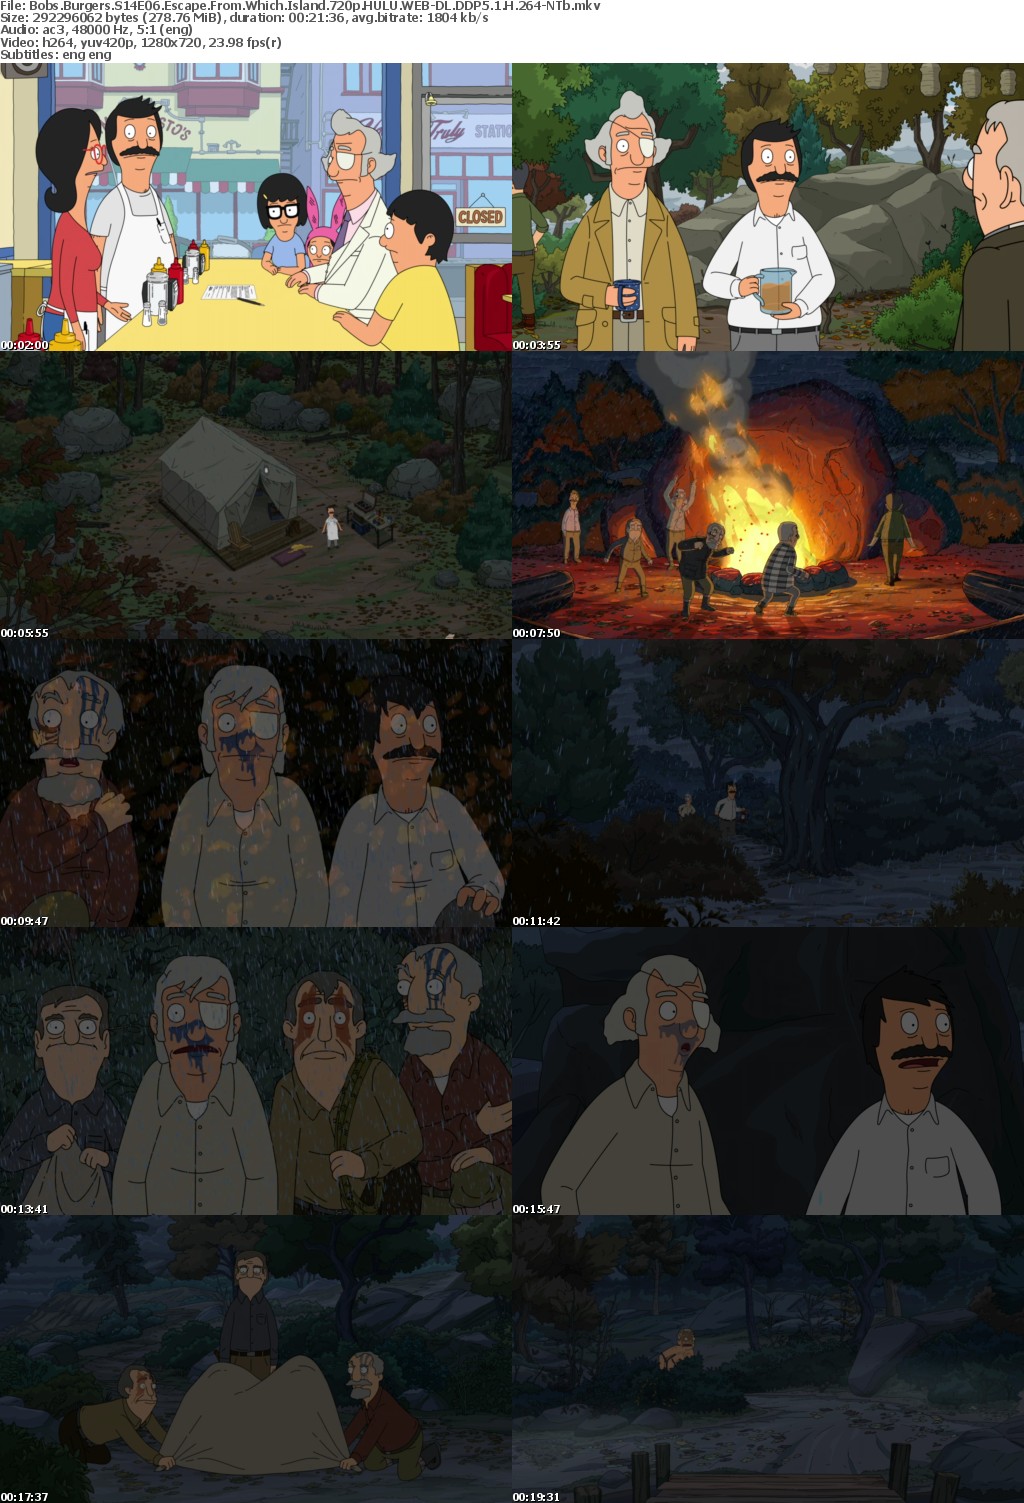 Bobs Burgers S14E06 Escape From Which Island 720p HULU WEB-DL DDP5 1 H 264-NTb